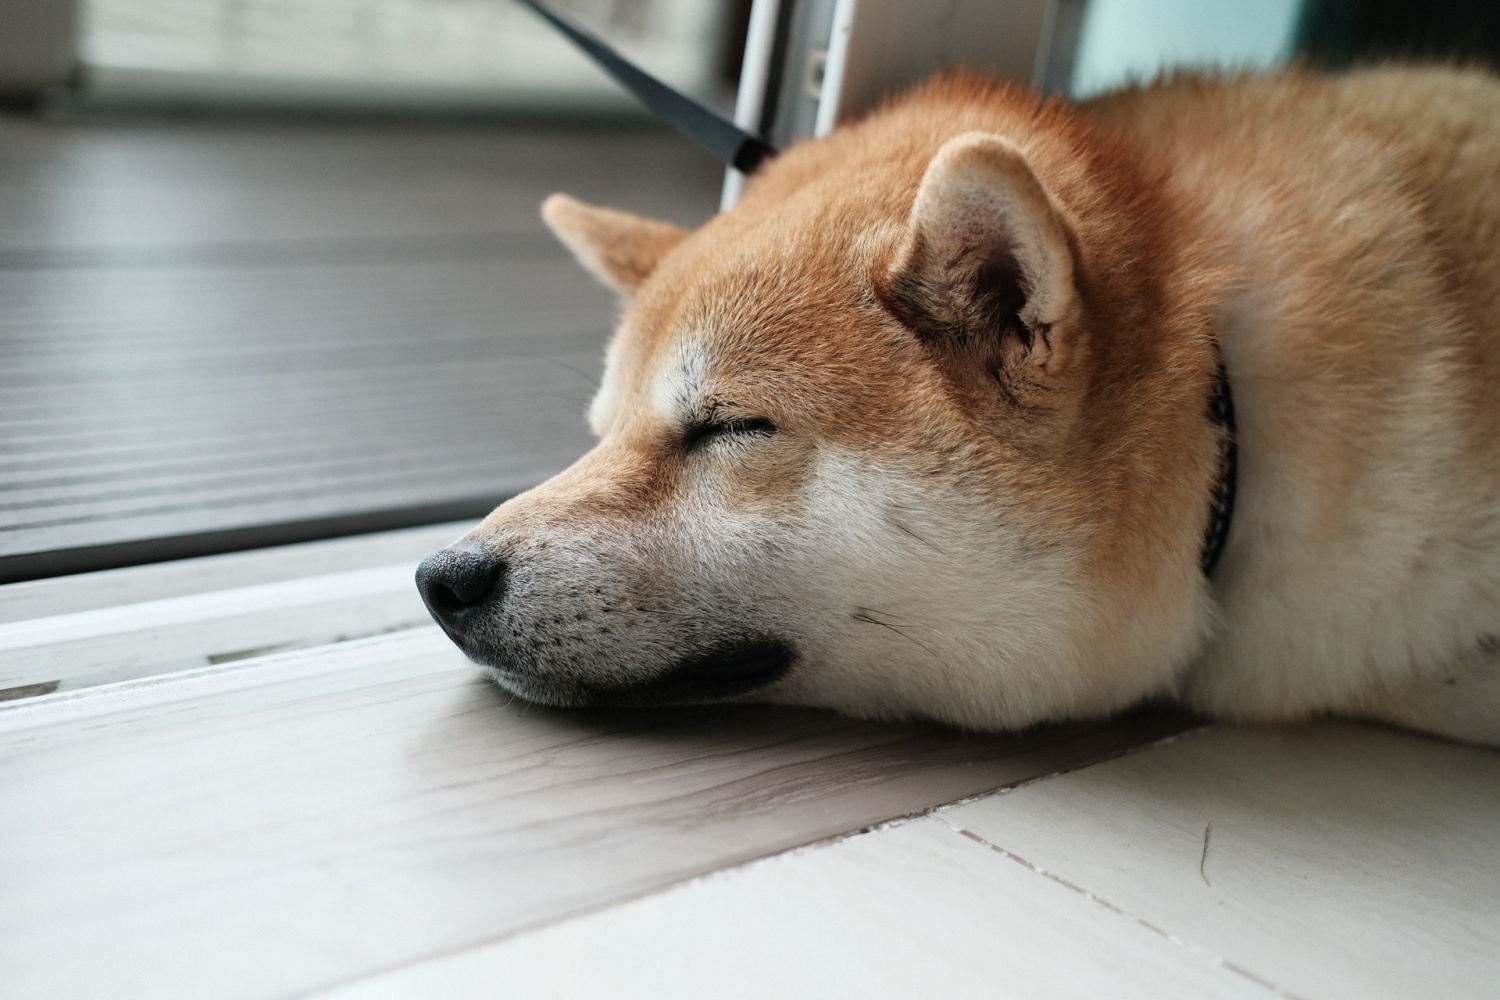 Dogecoin Price Today Falls After Binance Glitch: Minor Issue Stops Doge Withdrawals